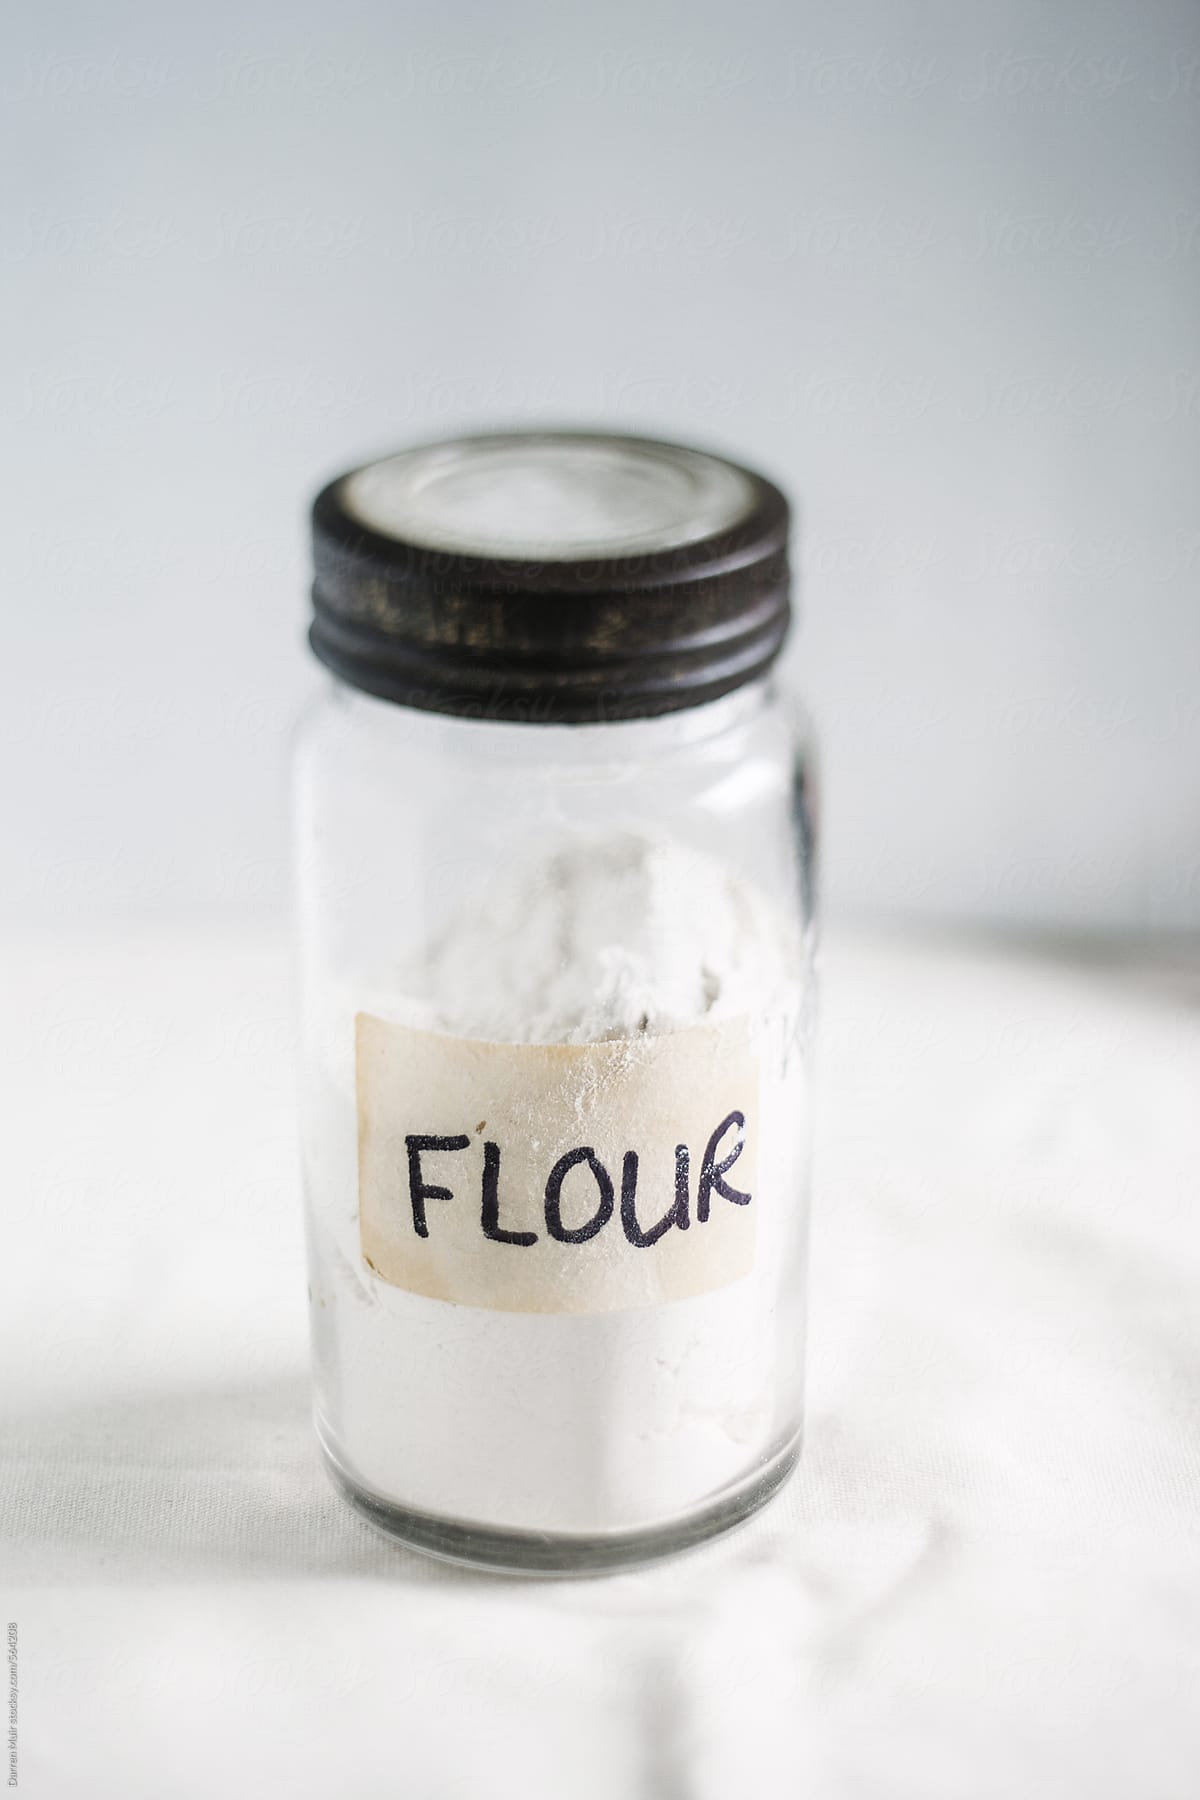 Glass jar of flour on off white background. Selective focus on the label.